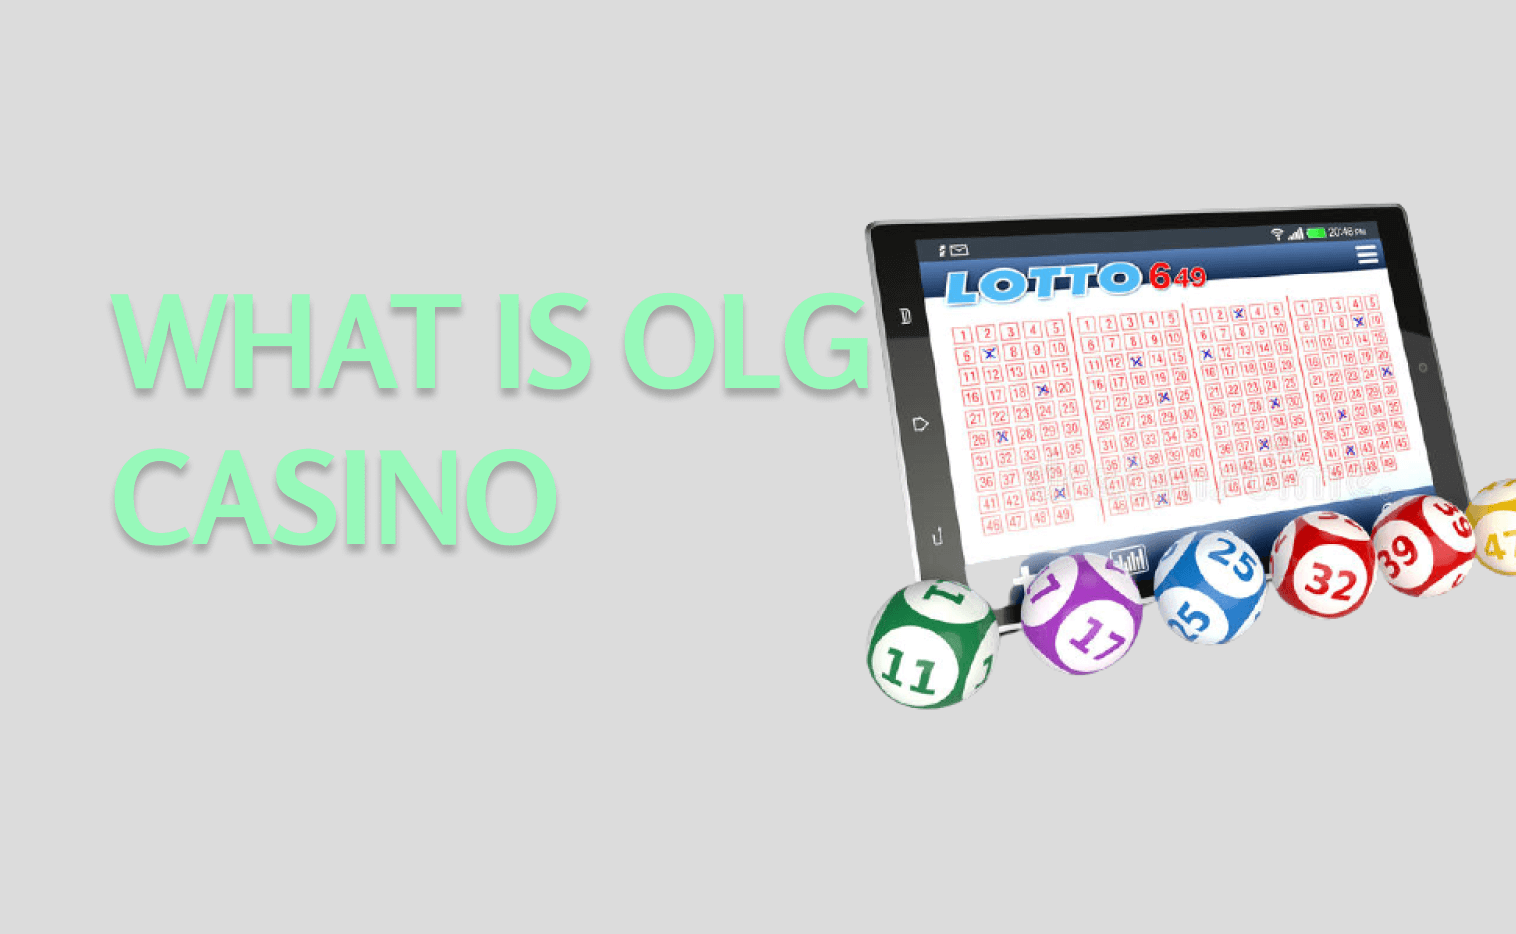 Wondering How To Make Your Casino Online Rock? Read This!